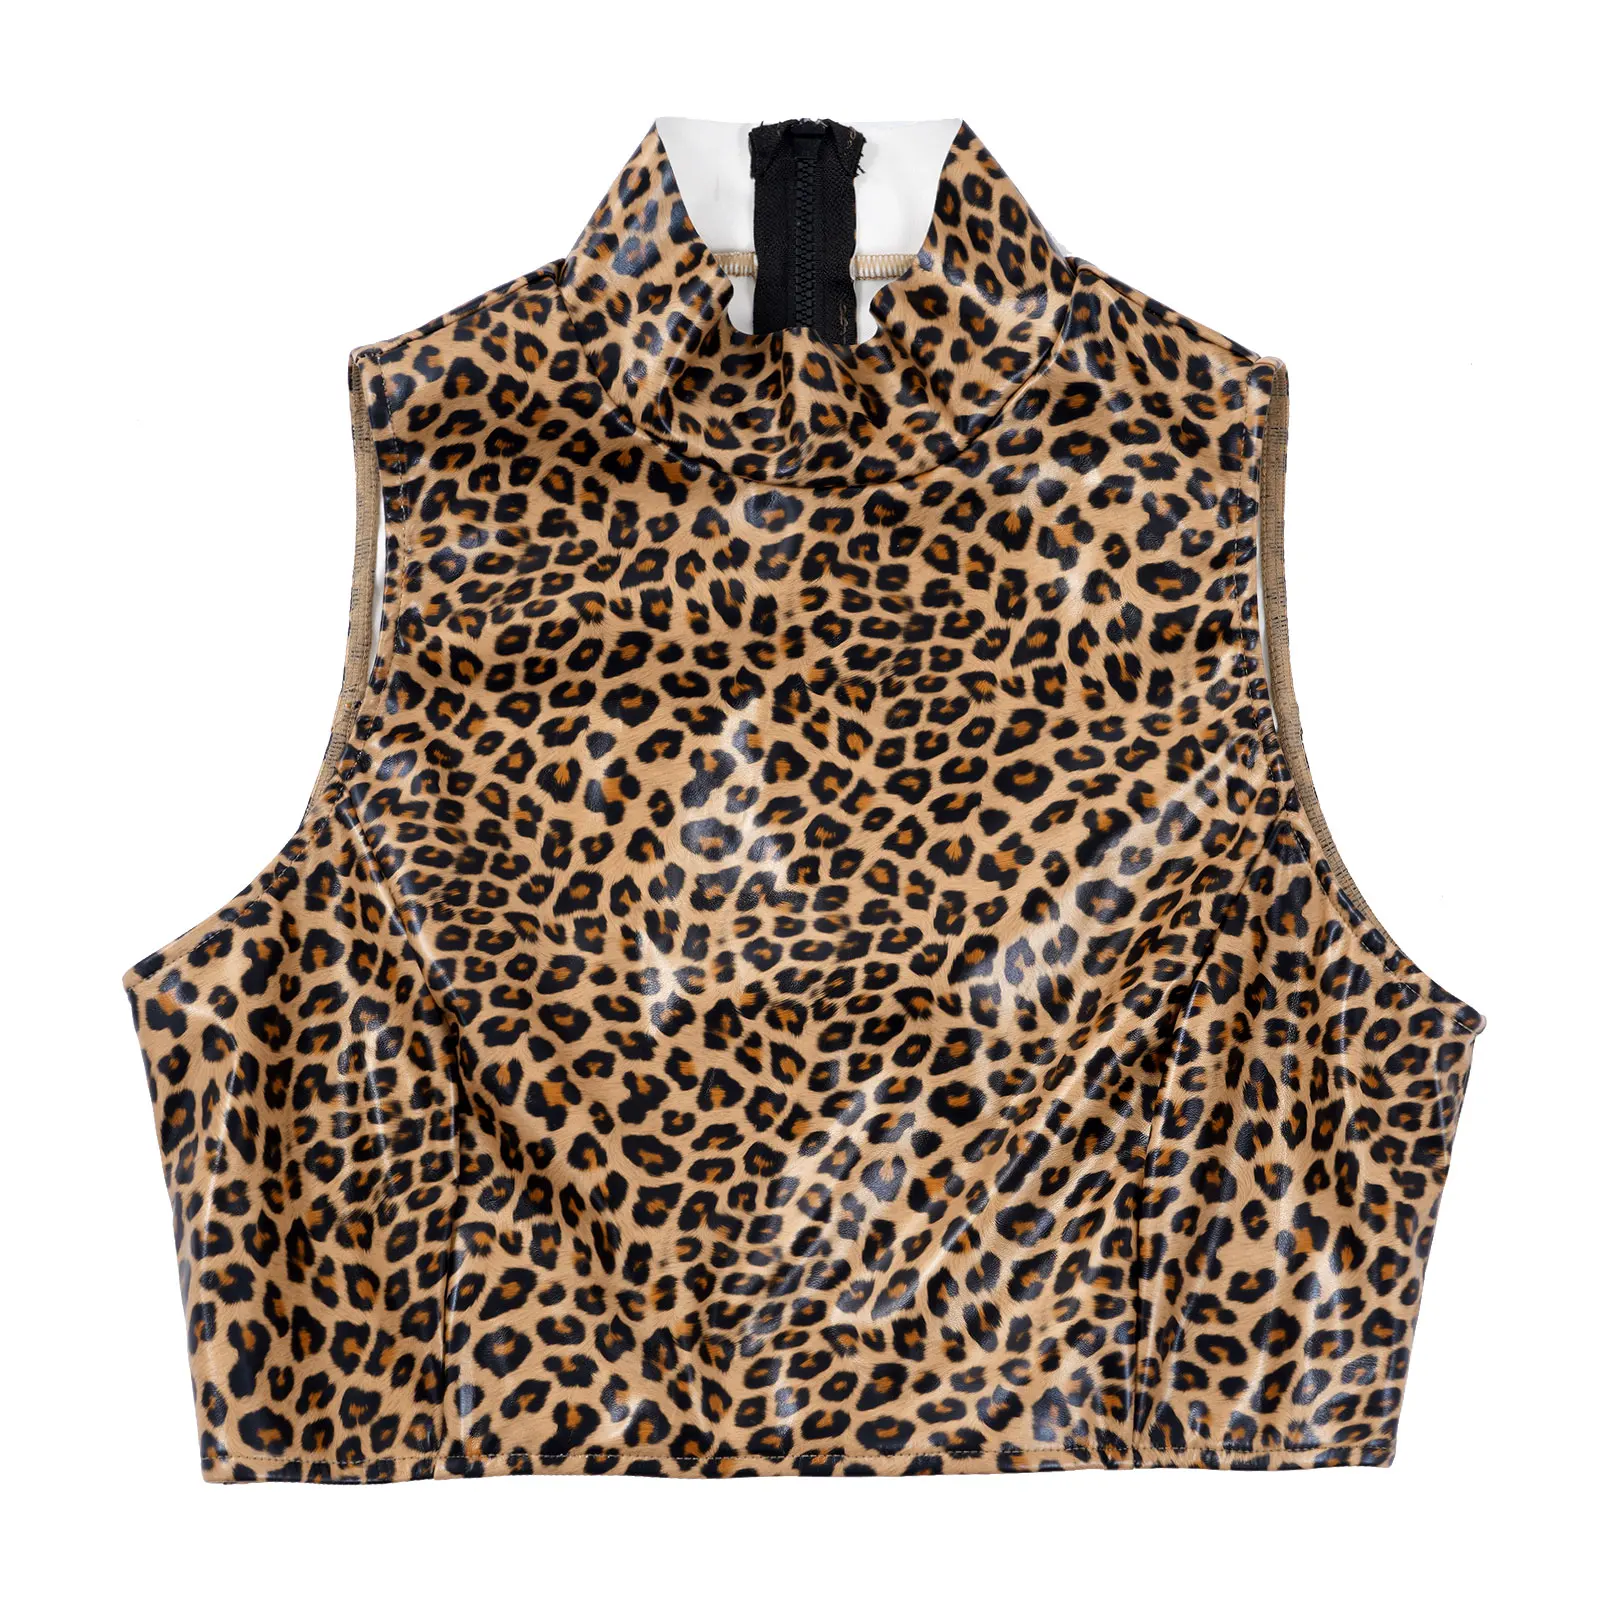 Out to hunt – Shiny Leopard Top